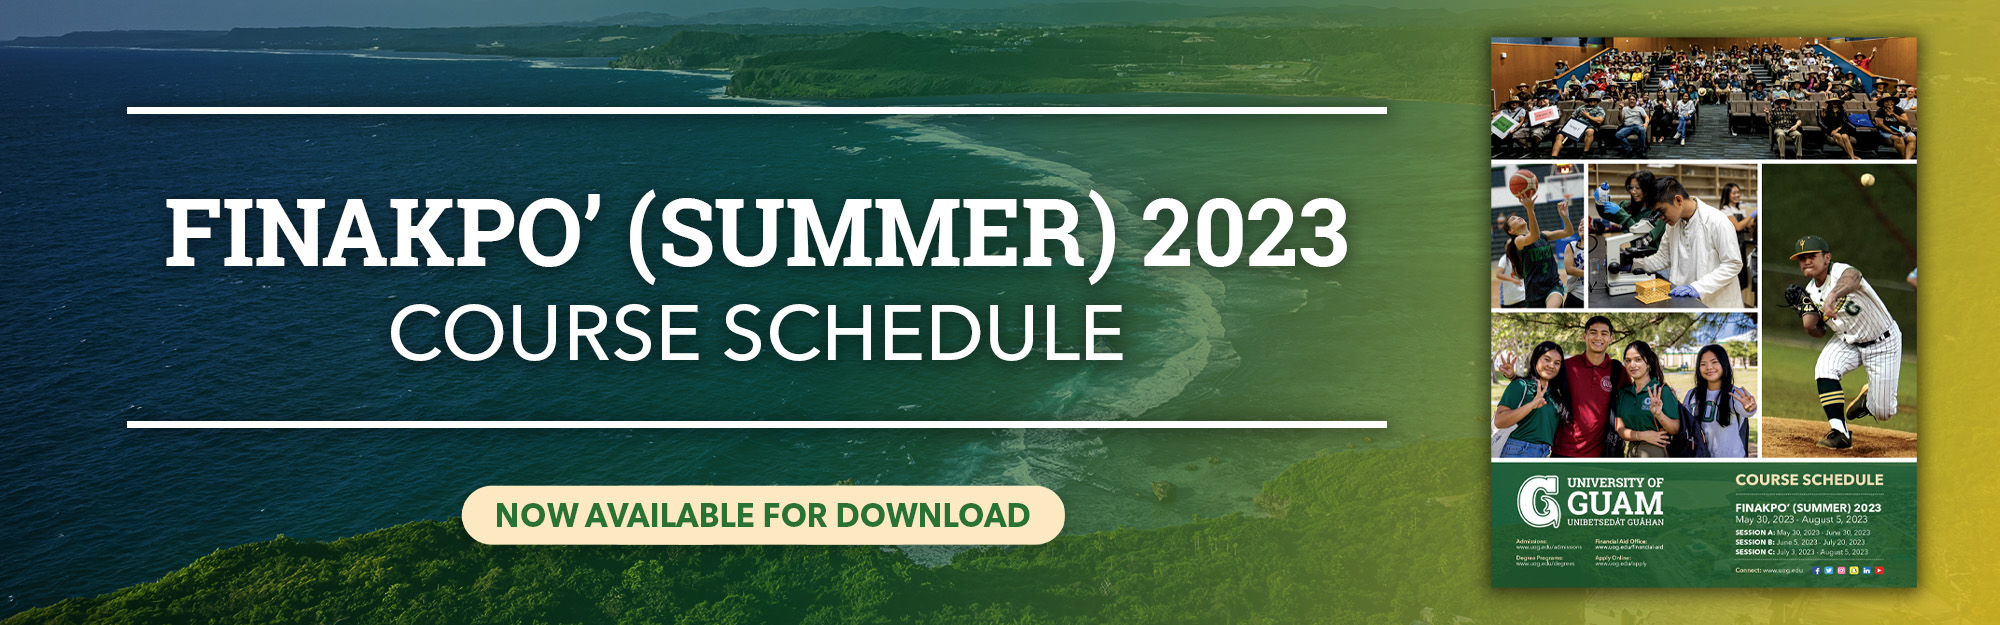 Finakpo' (Summer) 2023 Course Schedule now available!